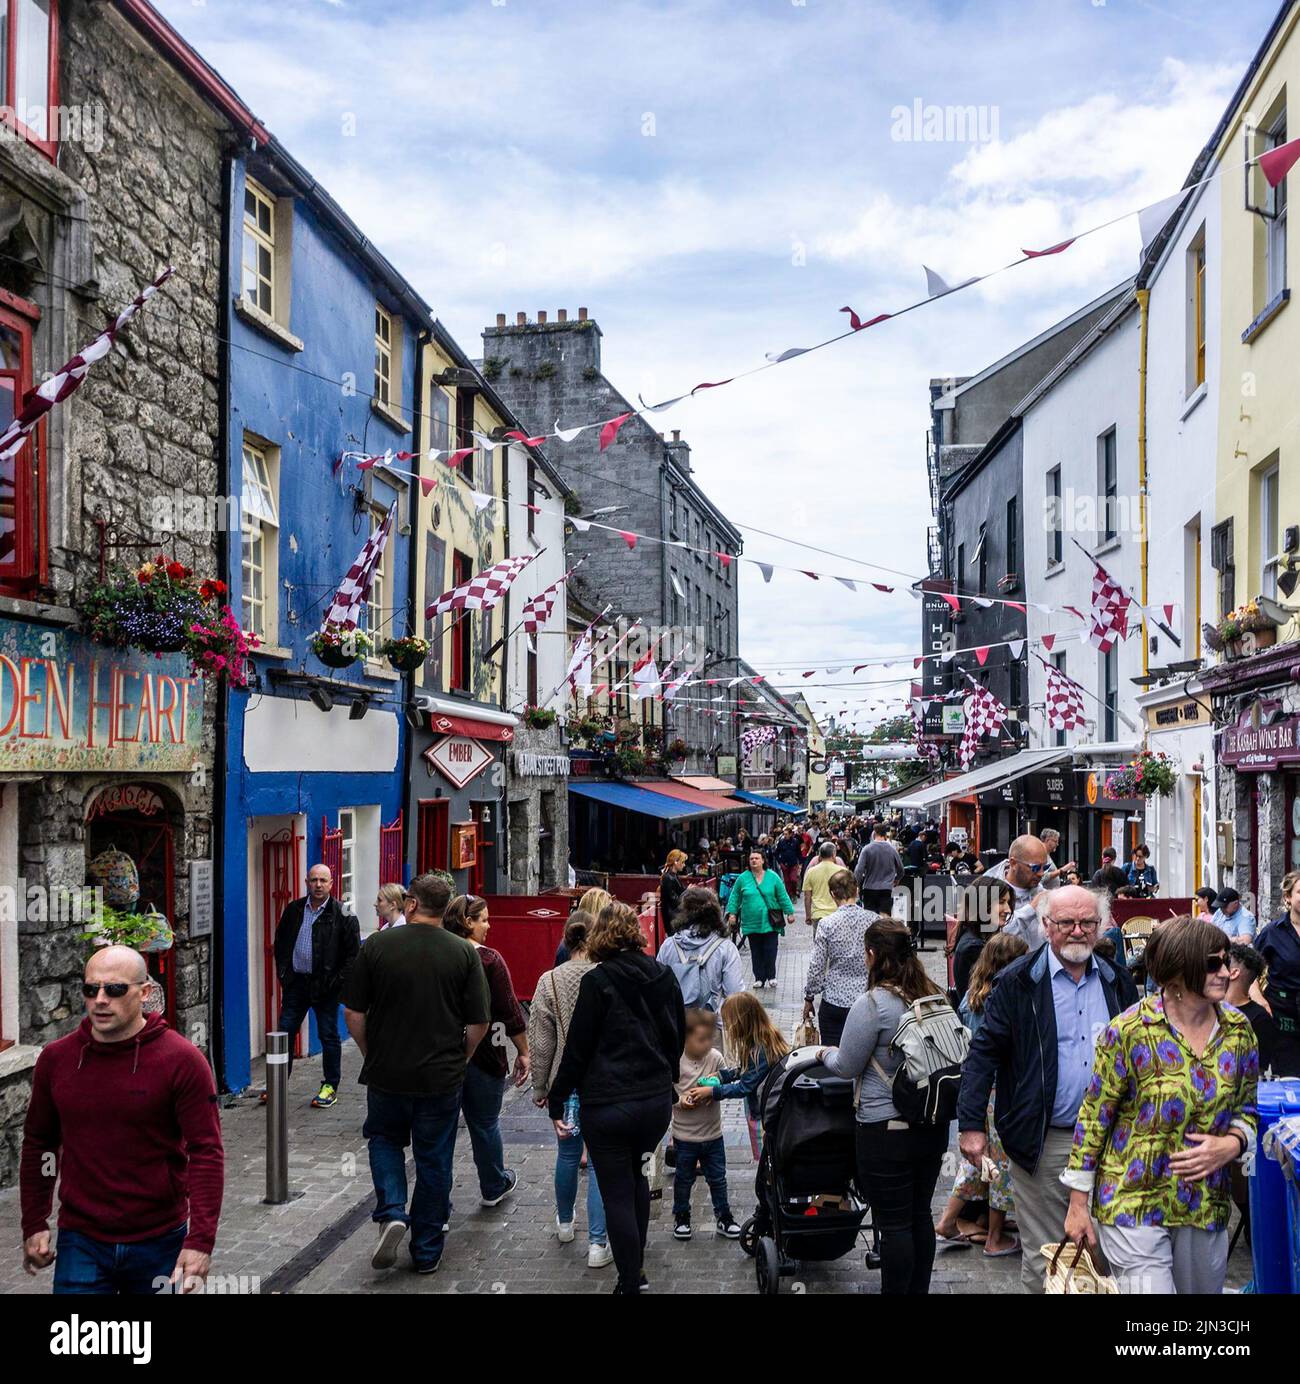 Quay Street, Galway Ireland, packed with shoppers on  Saturday afternoon. Stock Photo